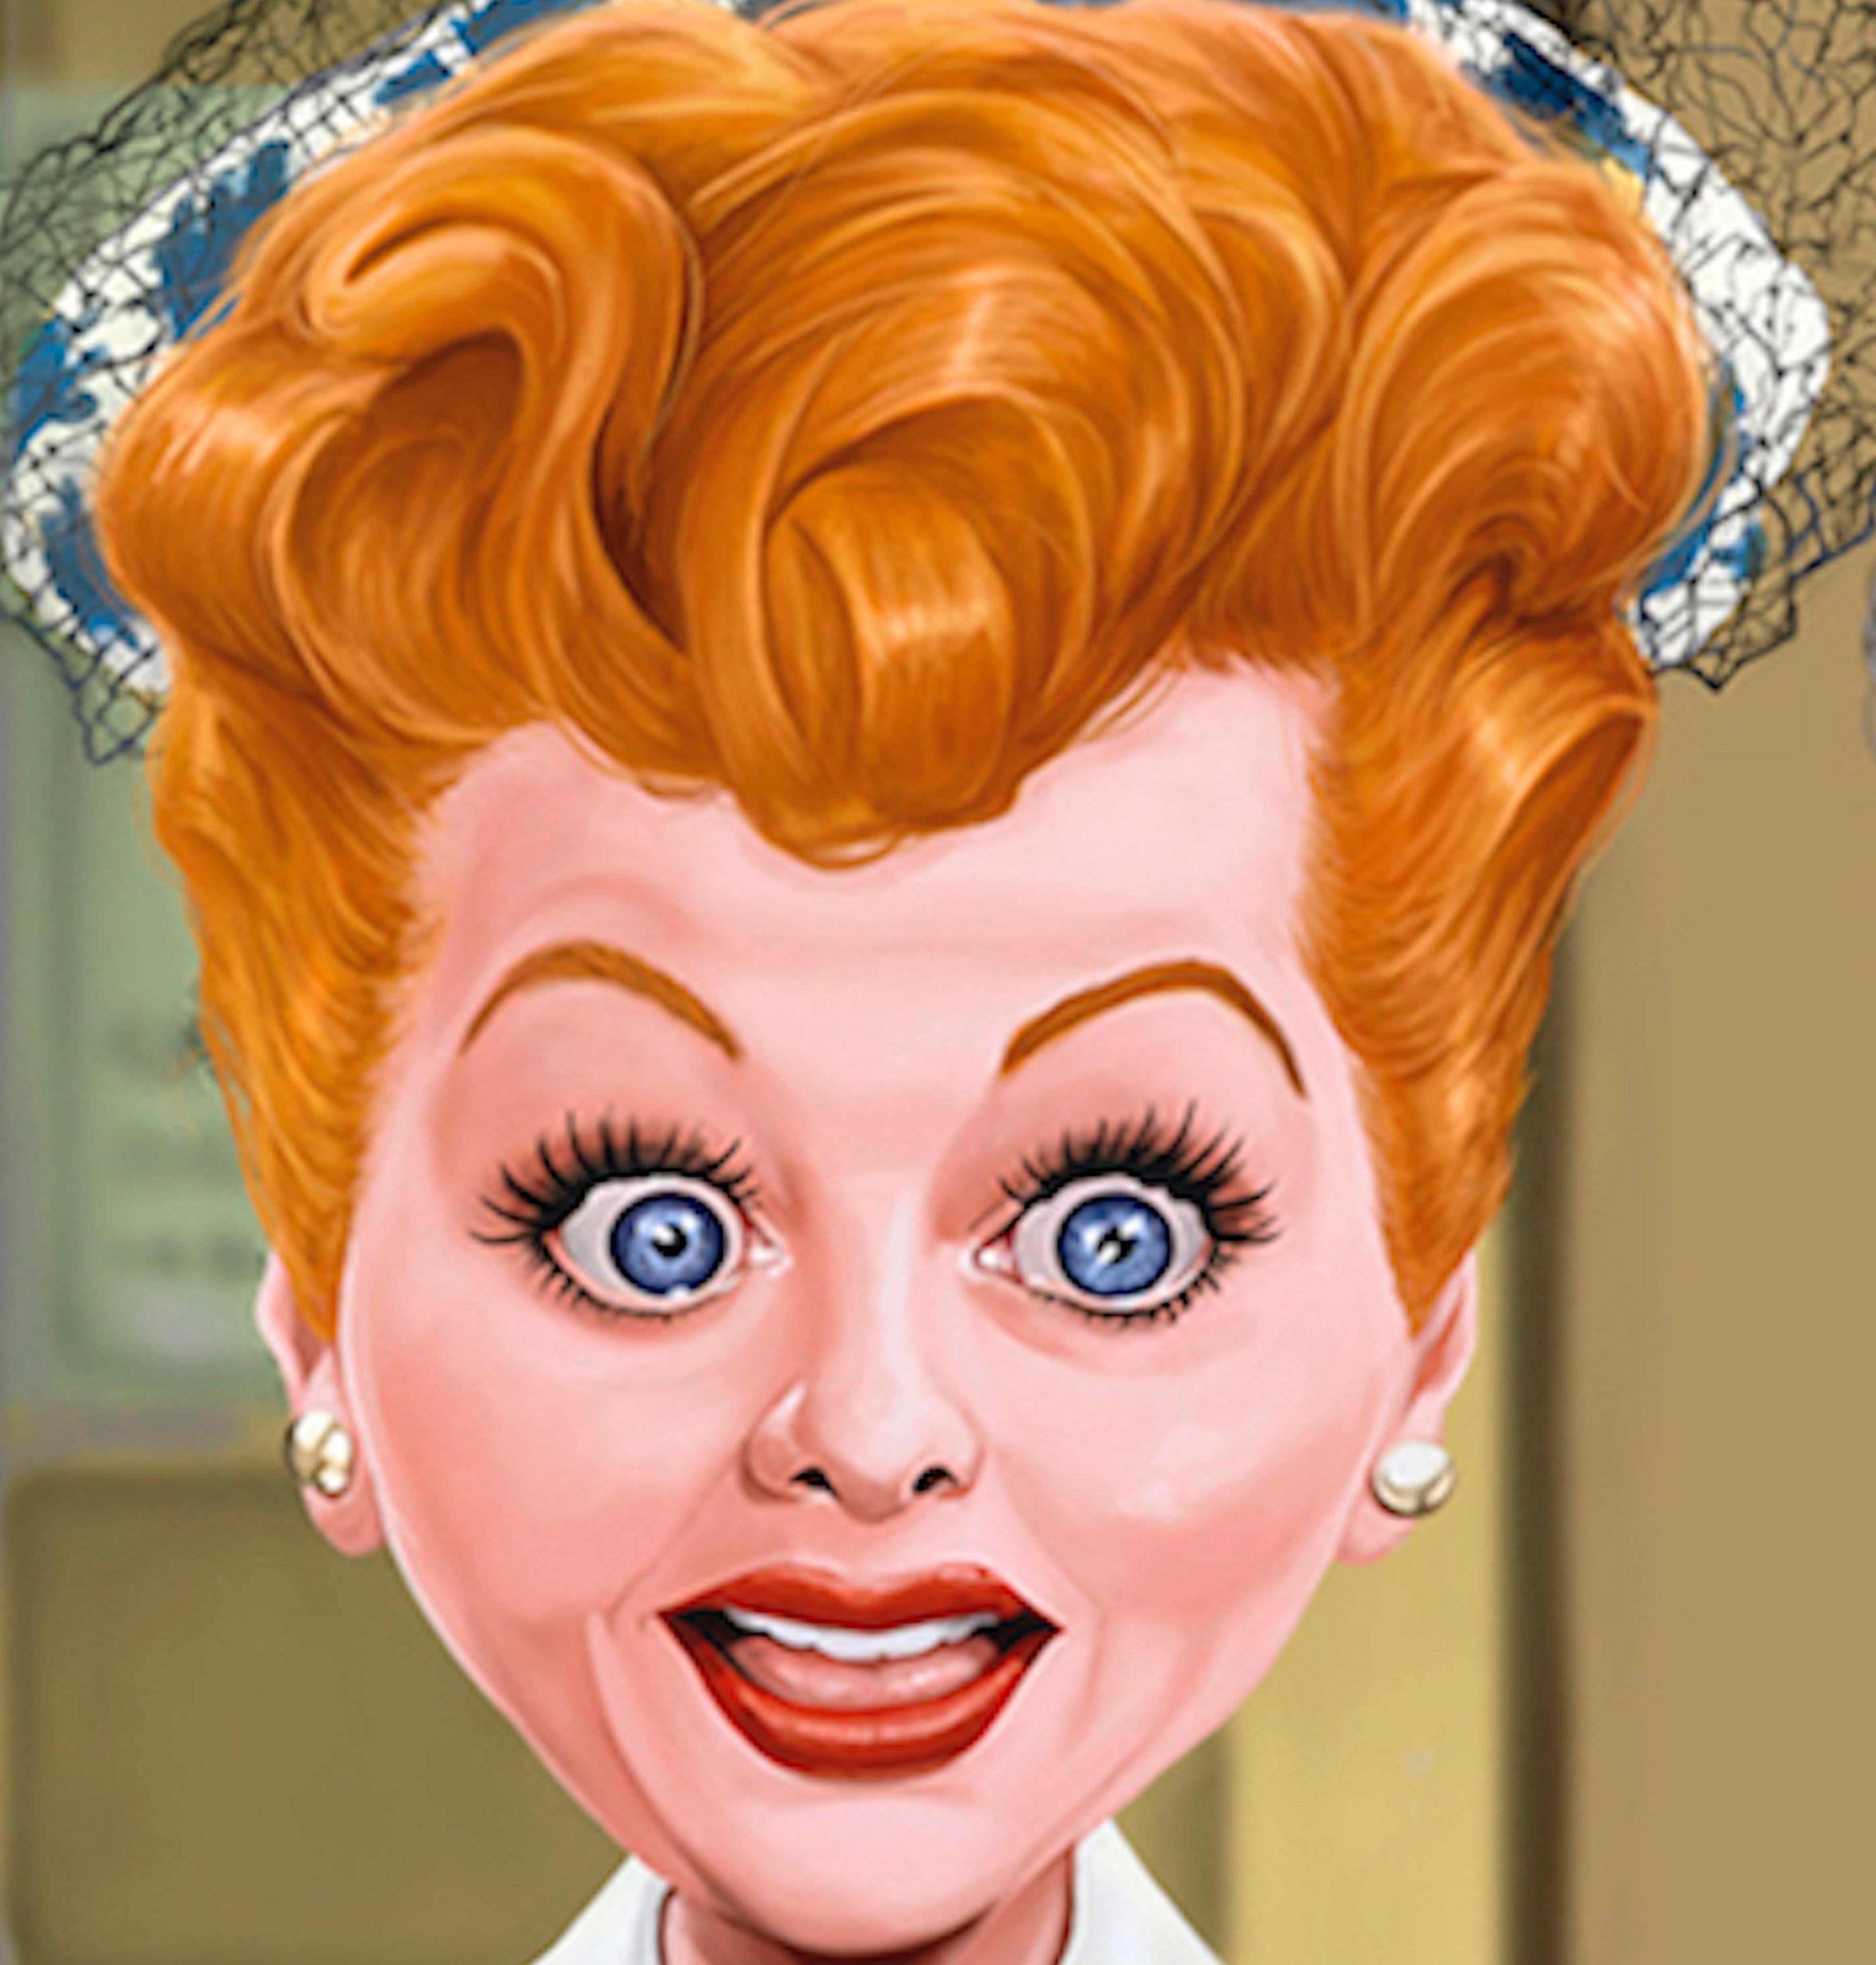 Vitameatavegamin Licensed I Love Lucy Giclee #8/30 - Print by Rich Conley